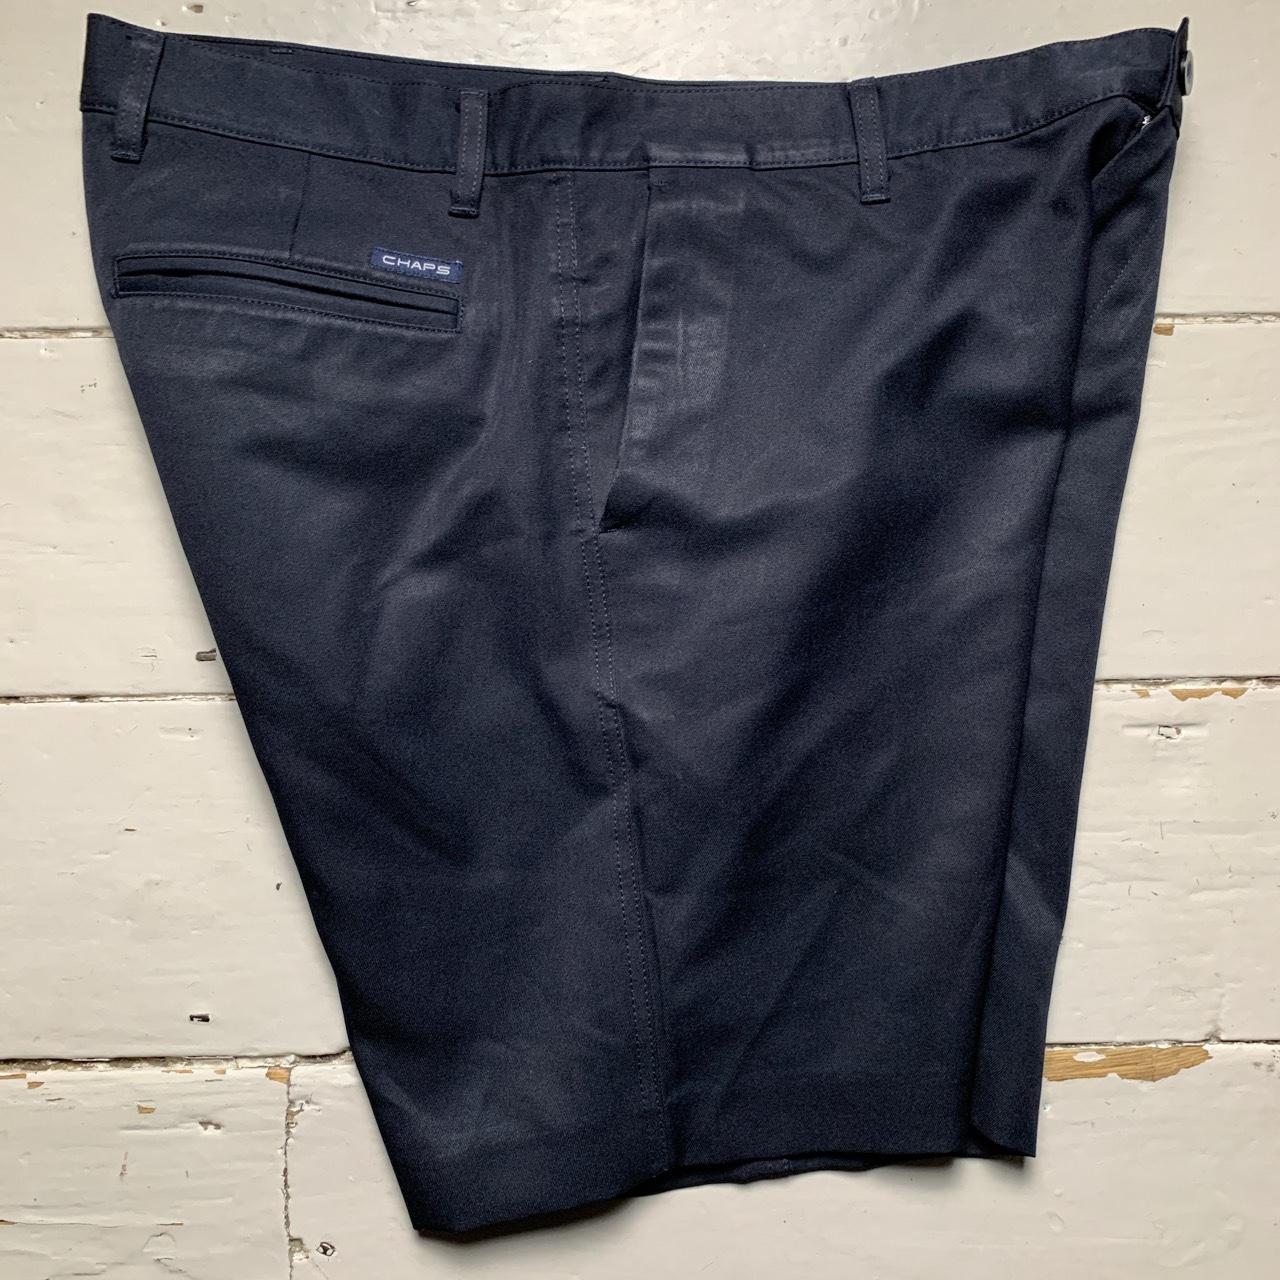 Chaps Vintage Navy Golf Shorts Navy and White